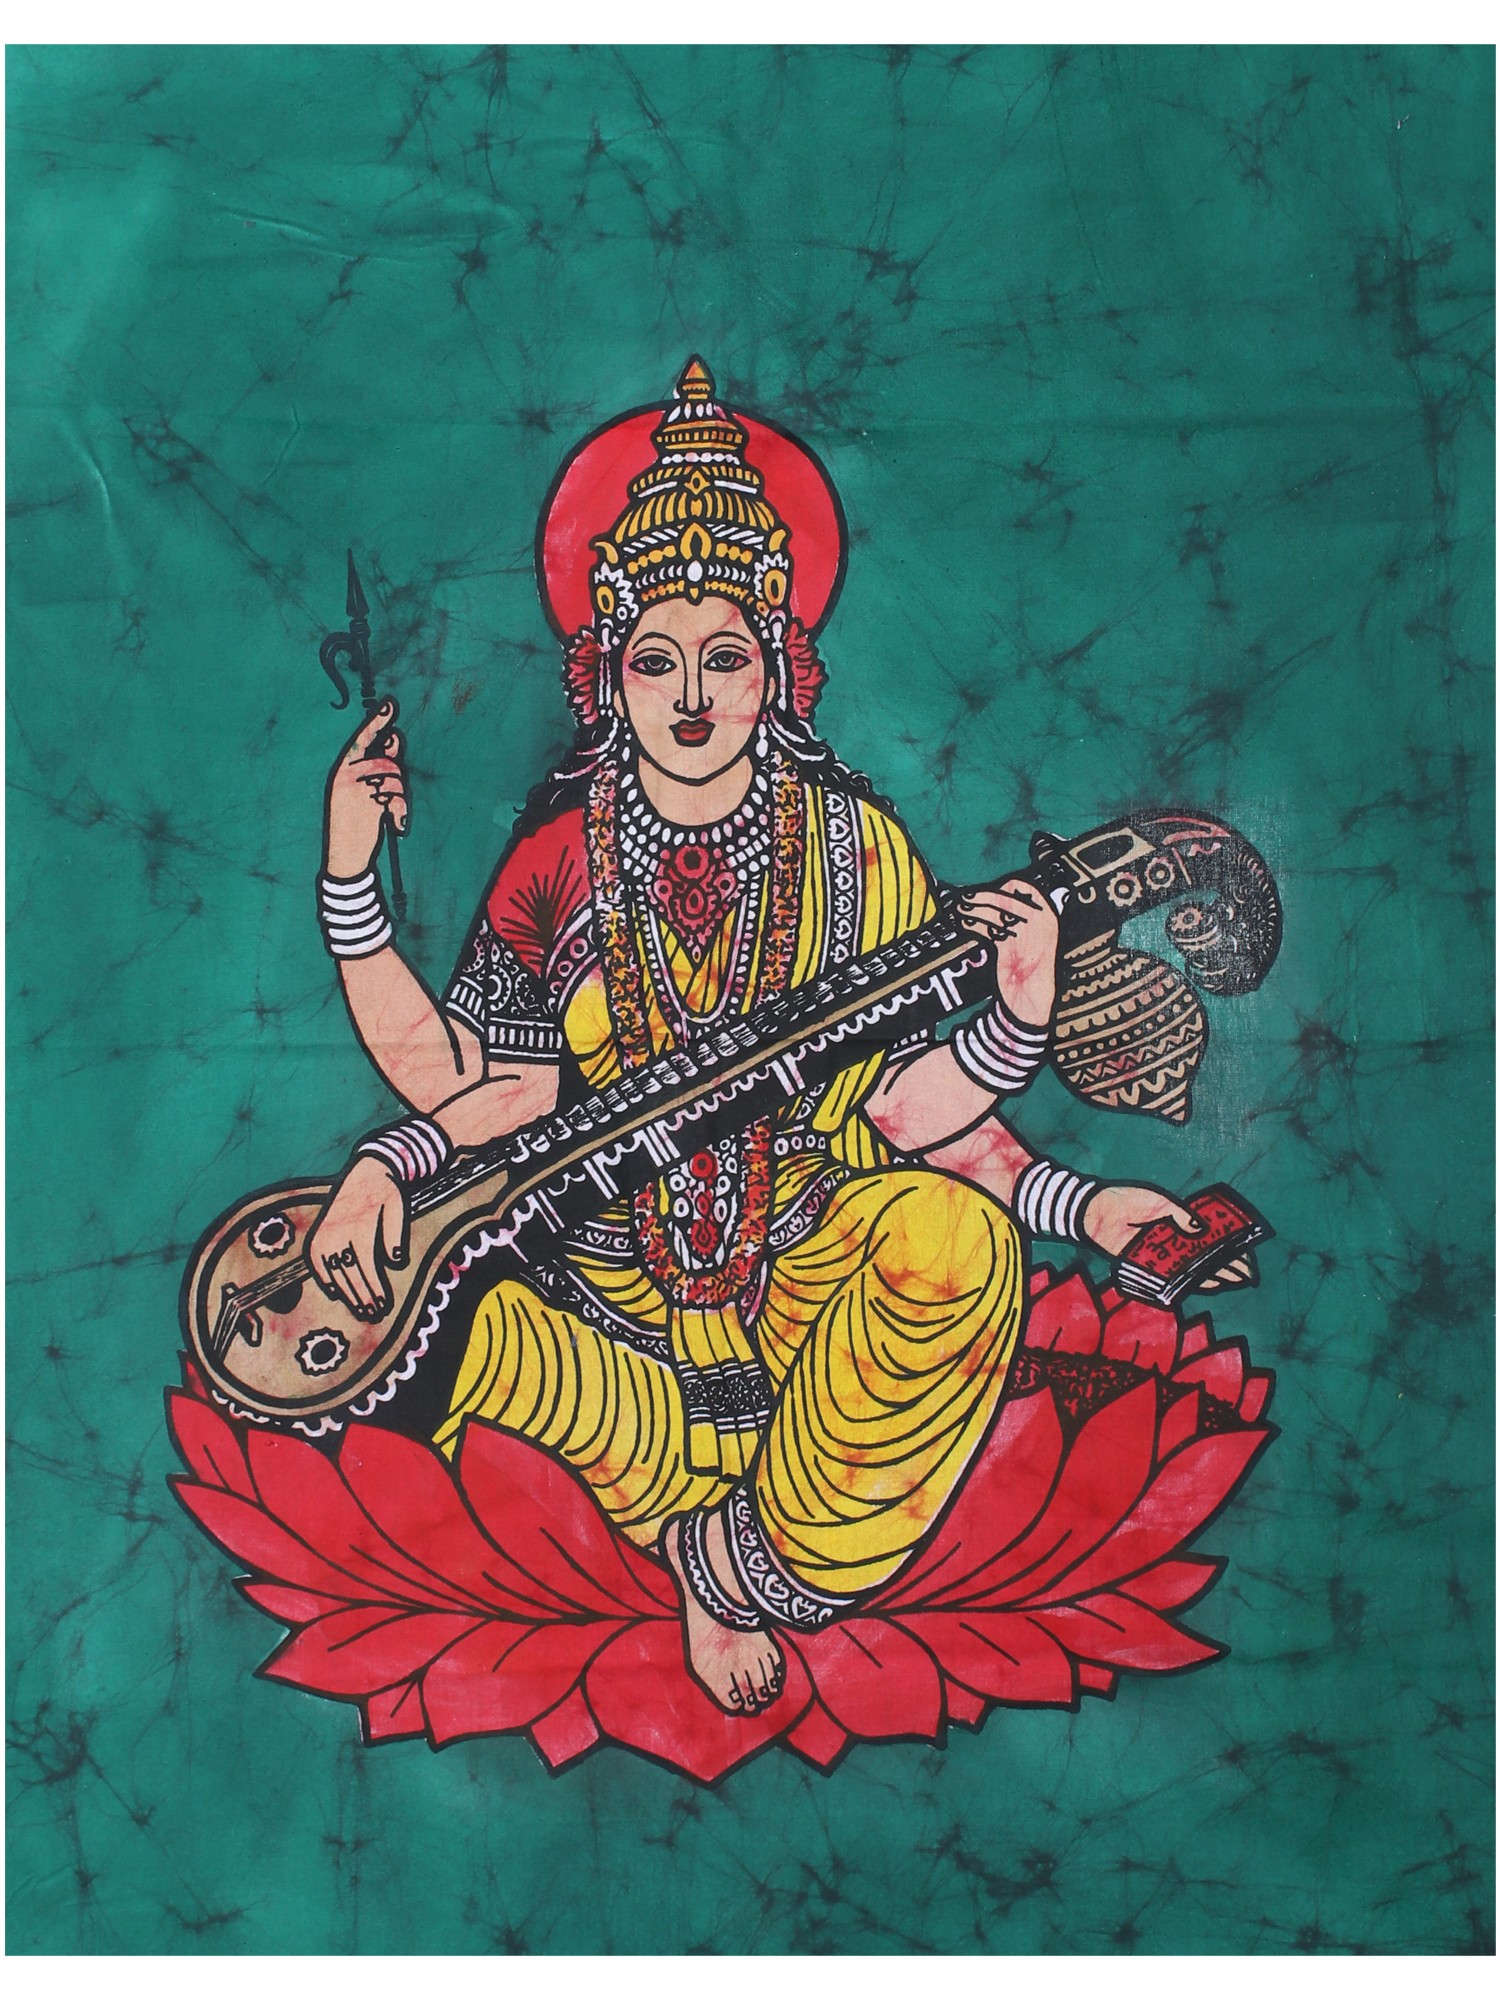 Raniban Retreat - Happy Saraswati Puja everyone. May Goddess Saraswati  bless all with abundant knowledge and the ability to put that knowledge to  proper usage. For all those who are unaware about